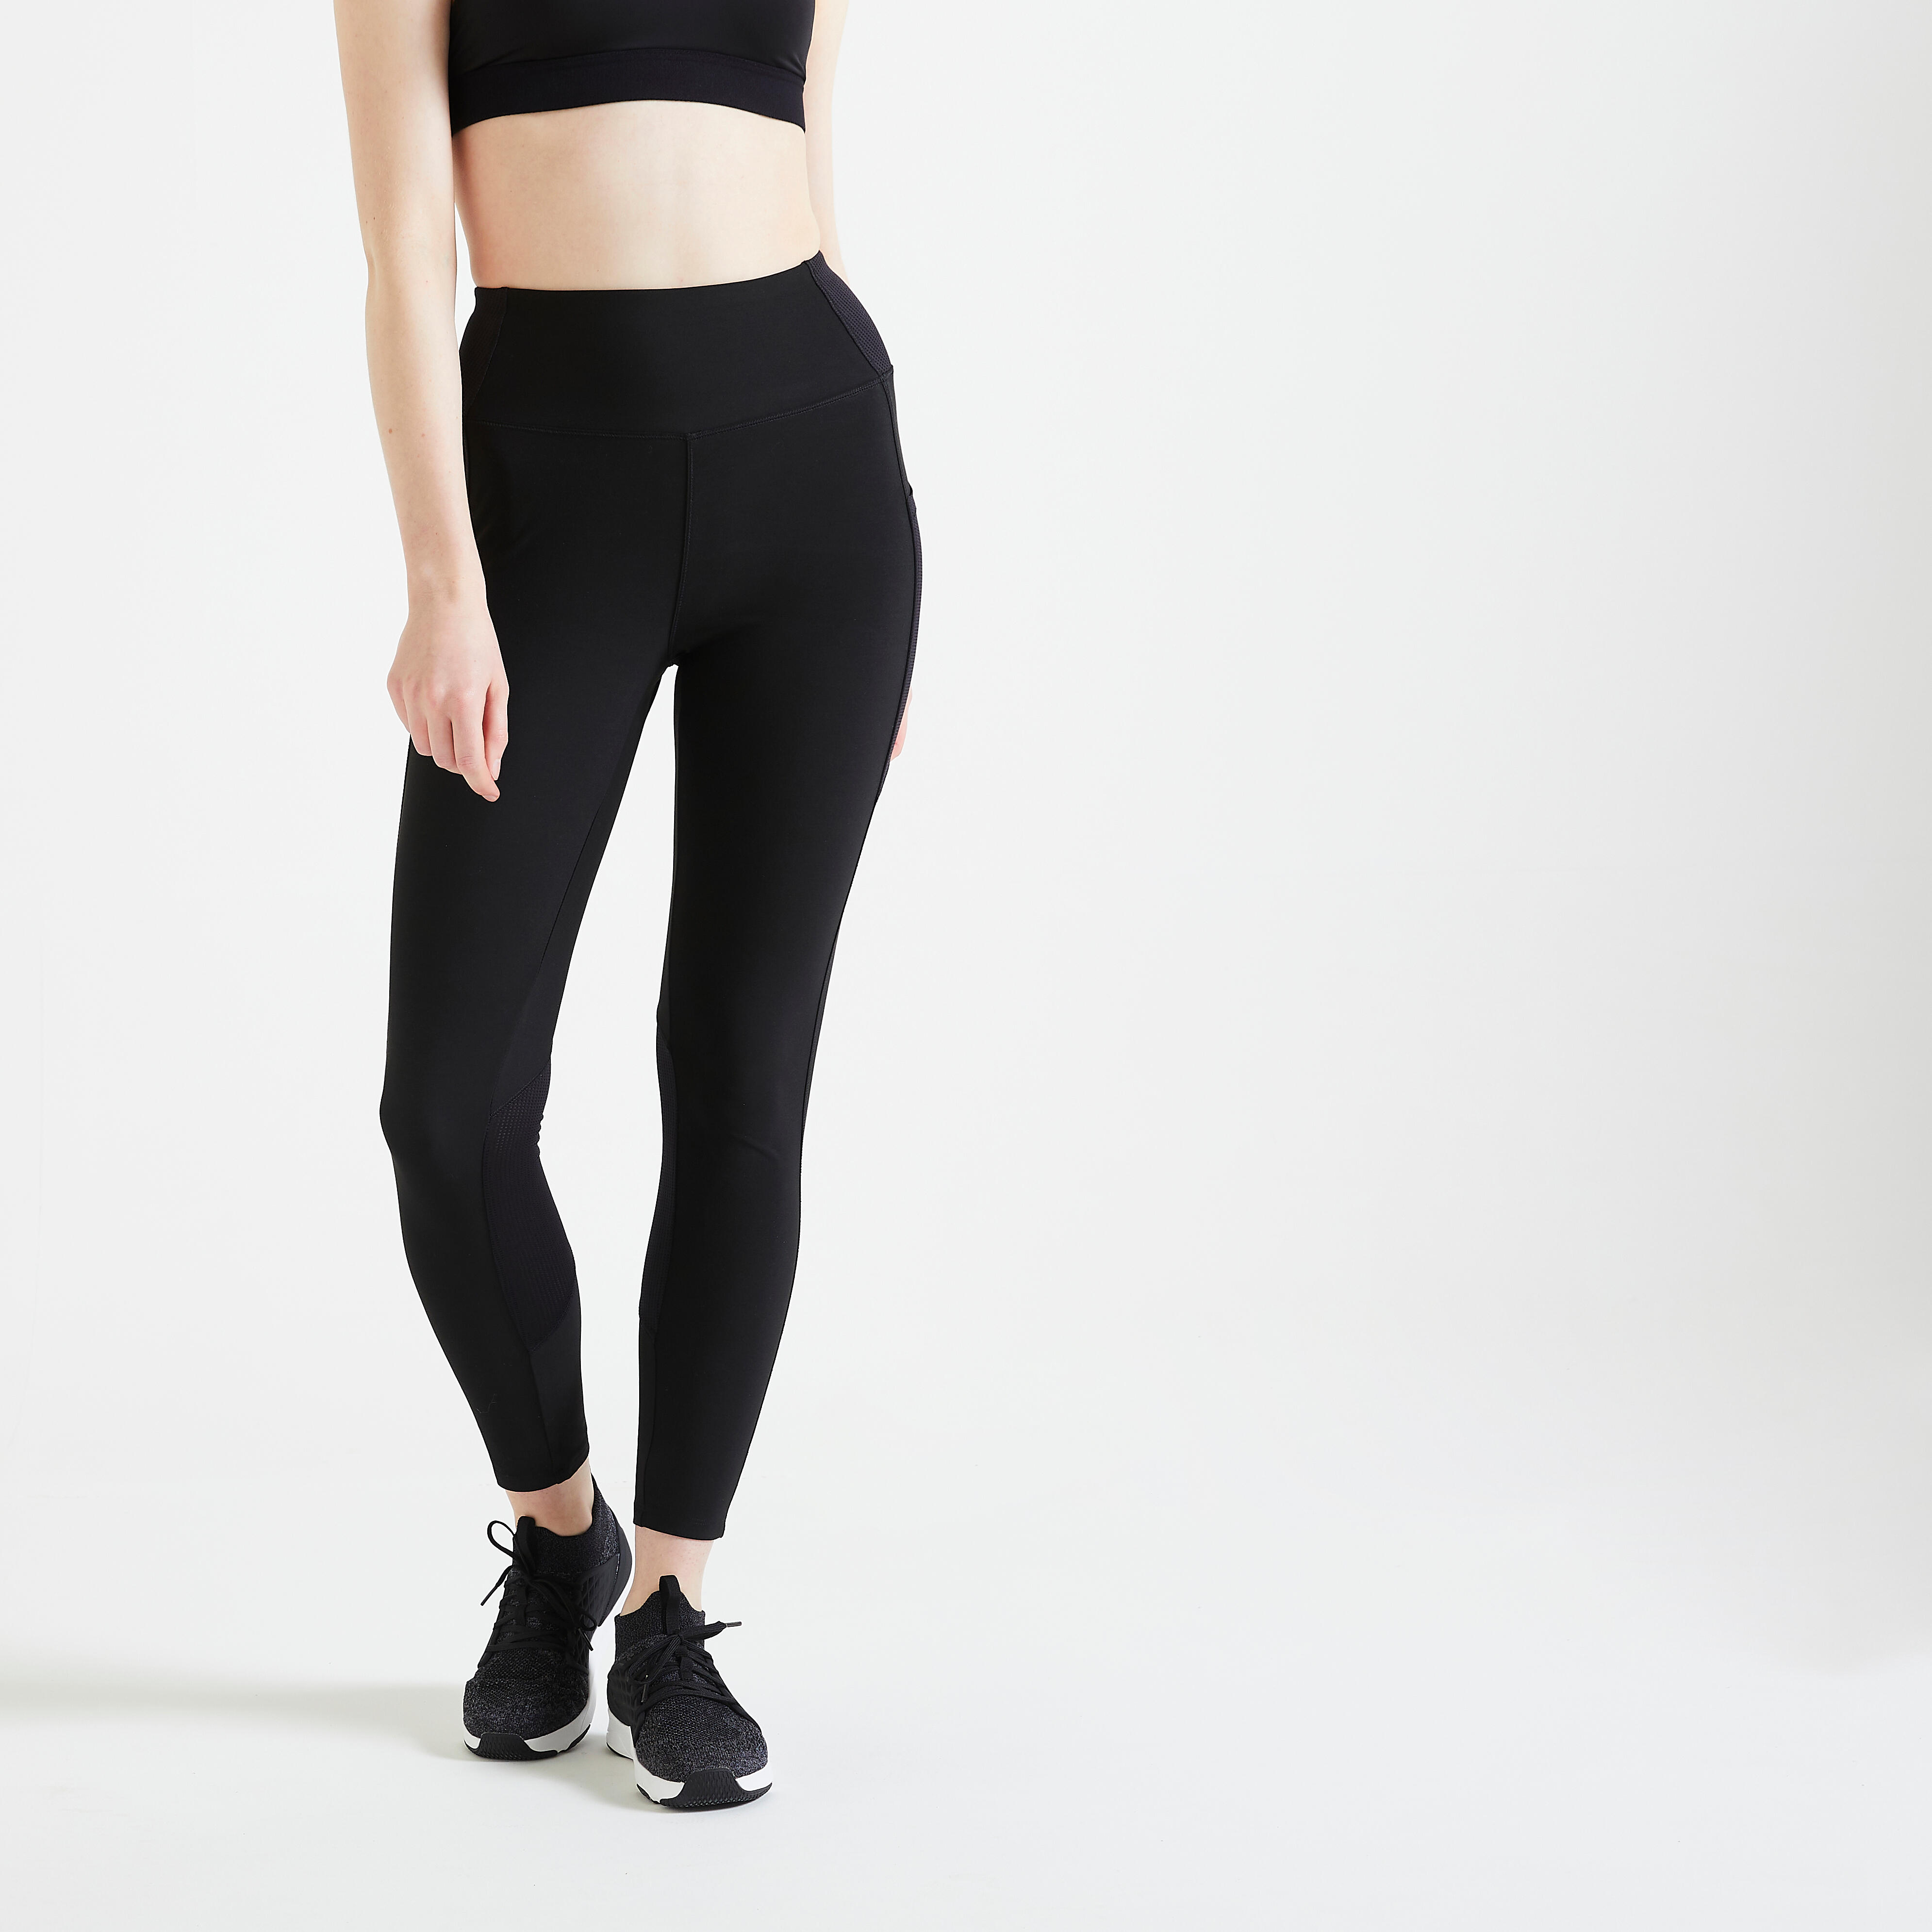 6 best black gym leggings you can buy, according to a PT | Marie Claire UK